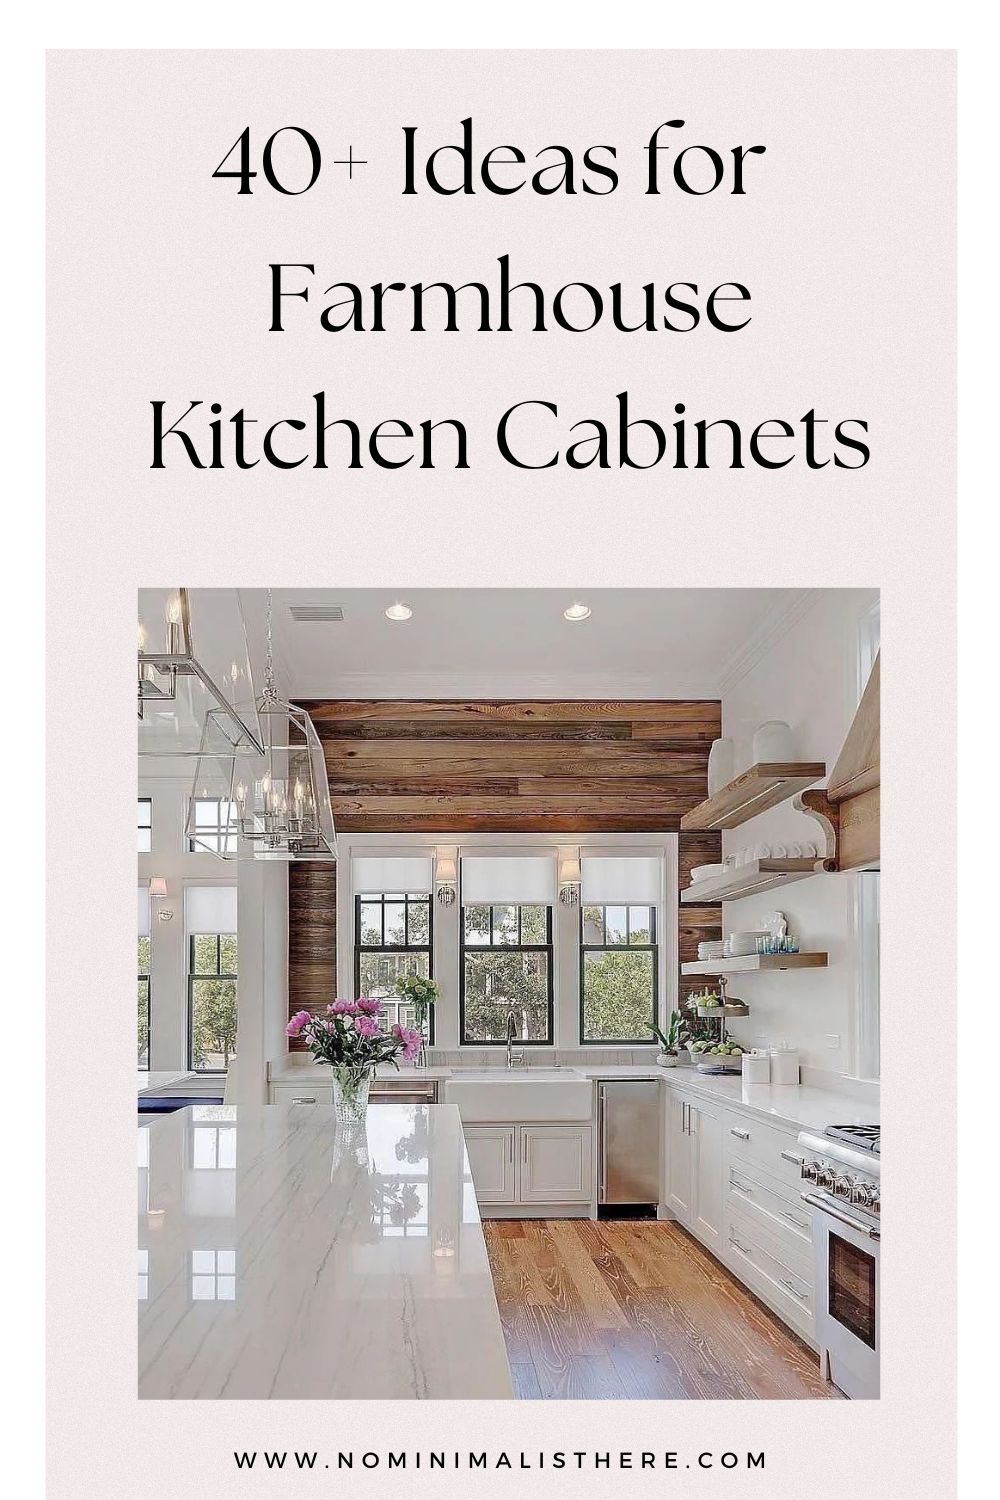 pinterest image for an article about Farmhouse kitchen cabinets